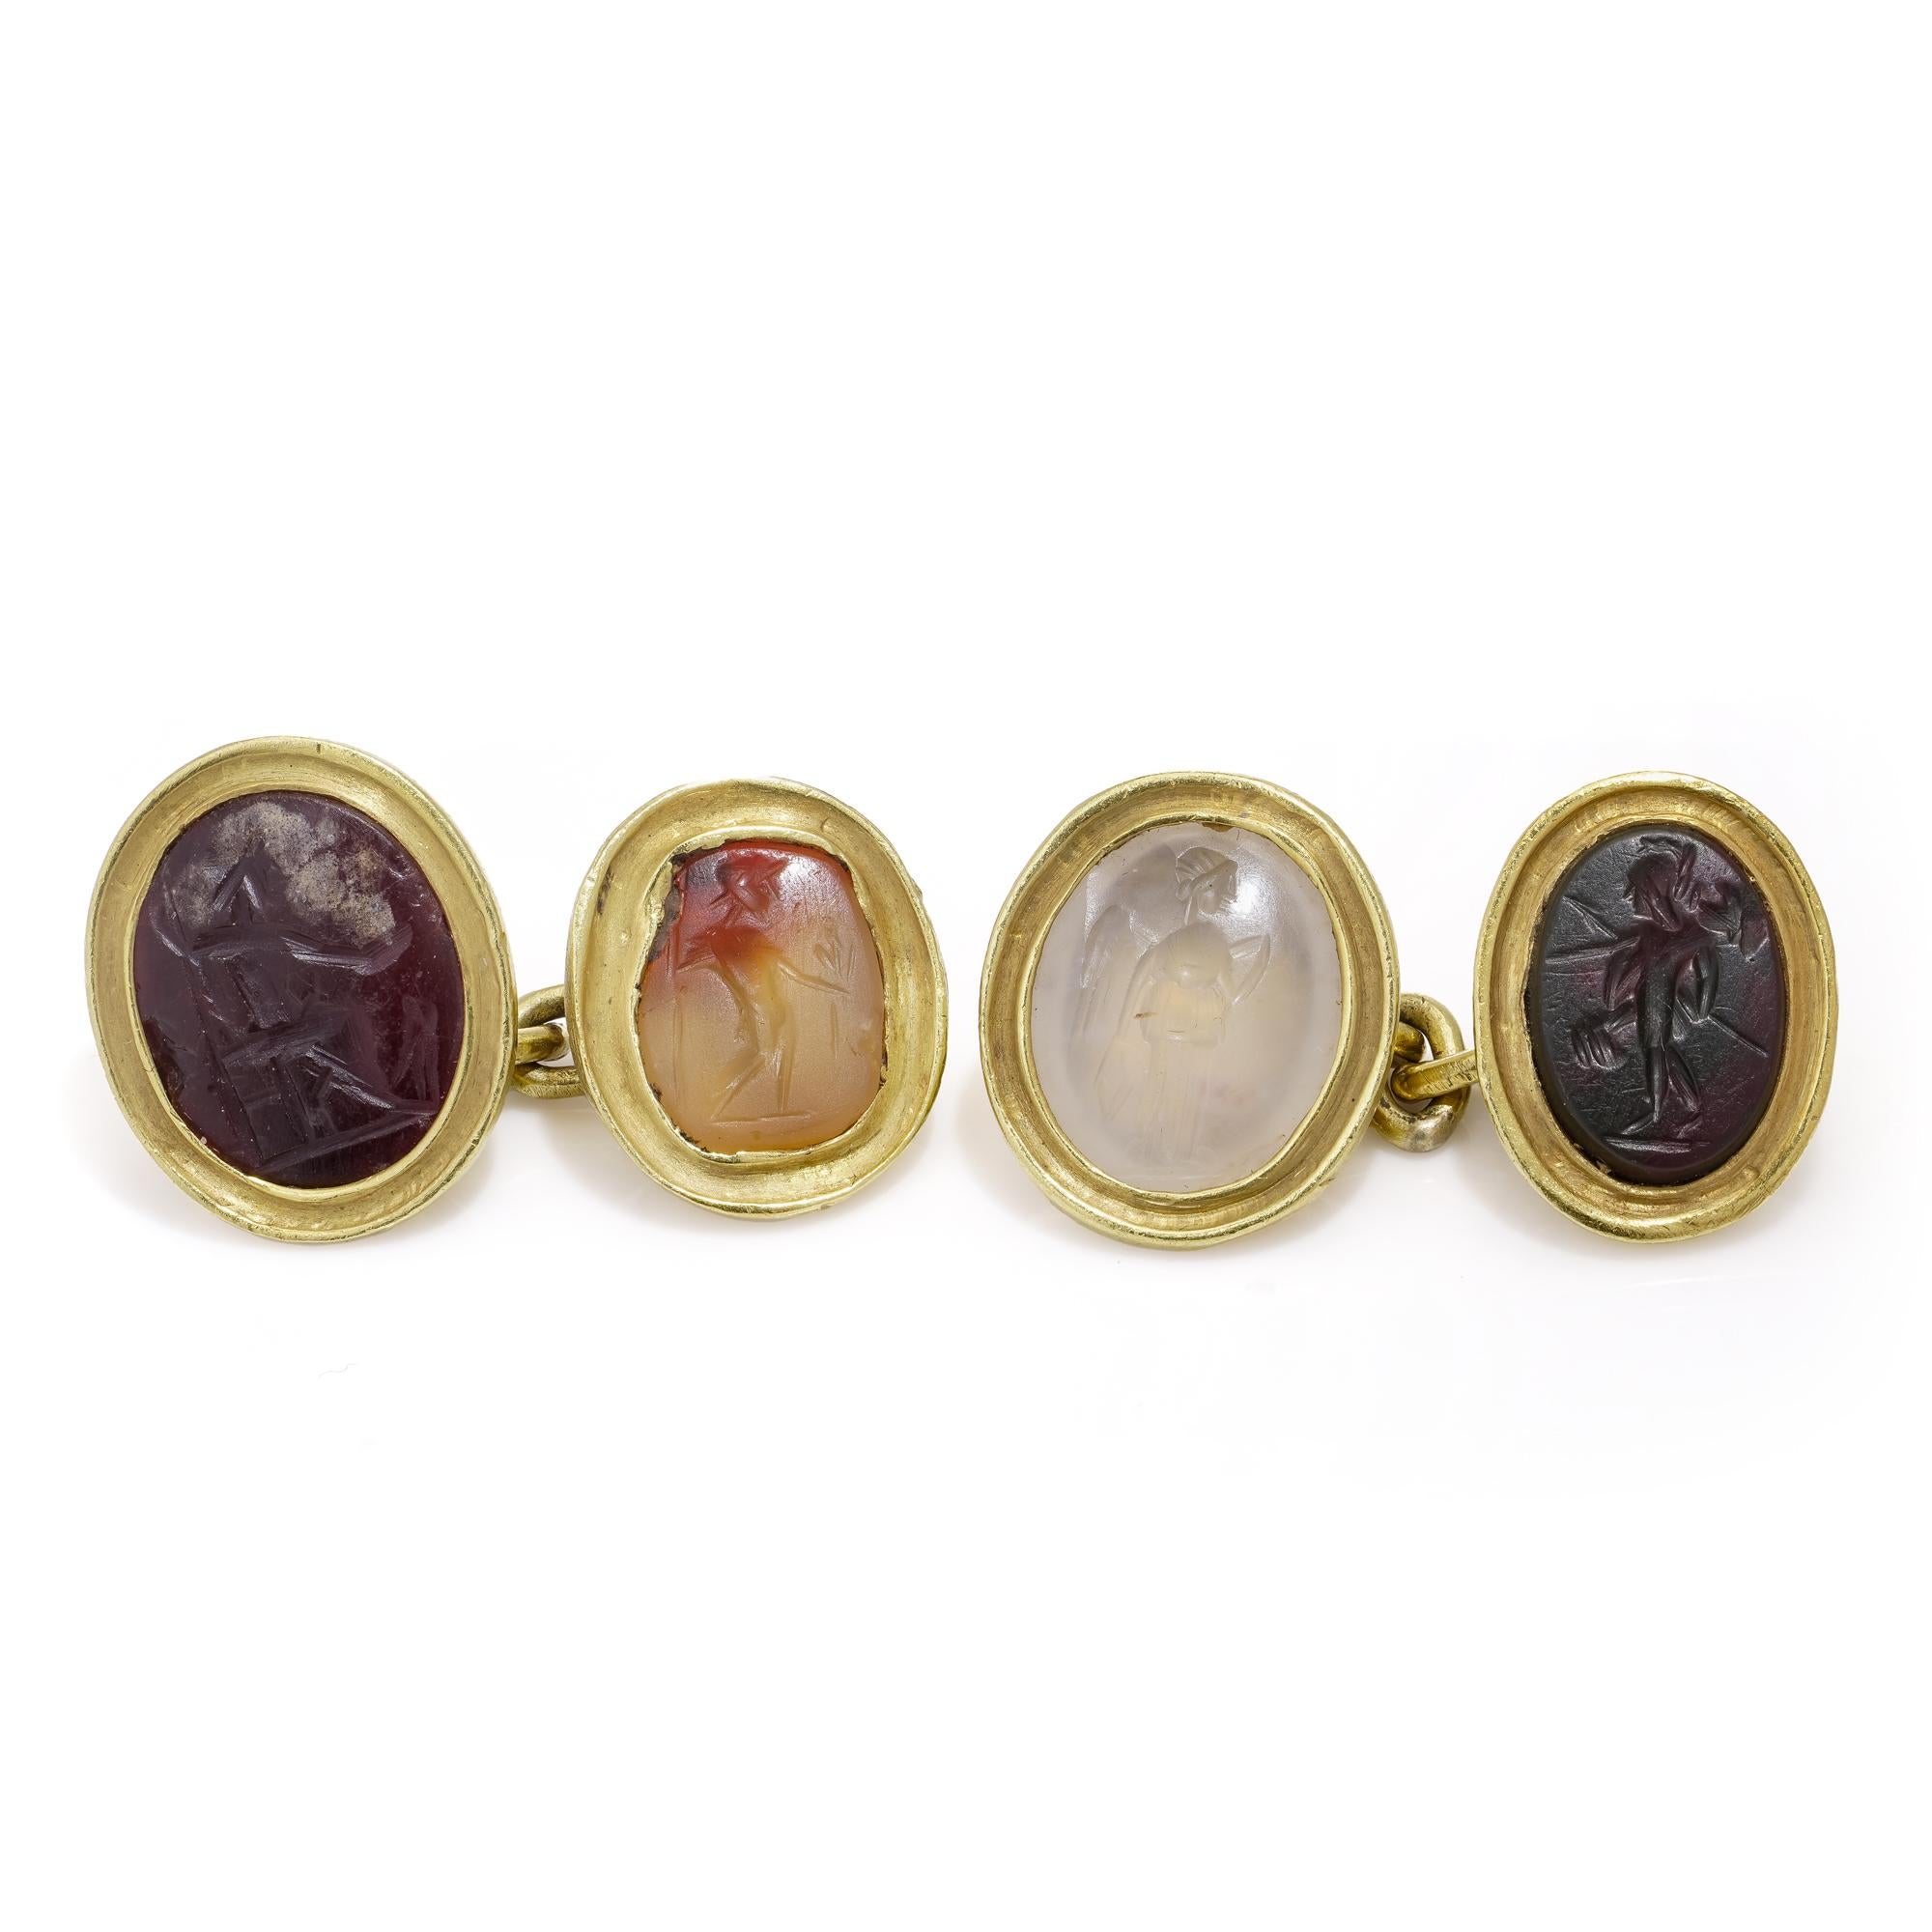 Antique 22kt yellow gold cufflinks, each adorned with Roman 4 carved hardstones, including Chalcedony, banded agate, carnelian, and hematite. Crafted in the 19th century, the intricate carvings depict various figures of a man. The X-ray verified for